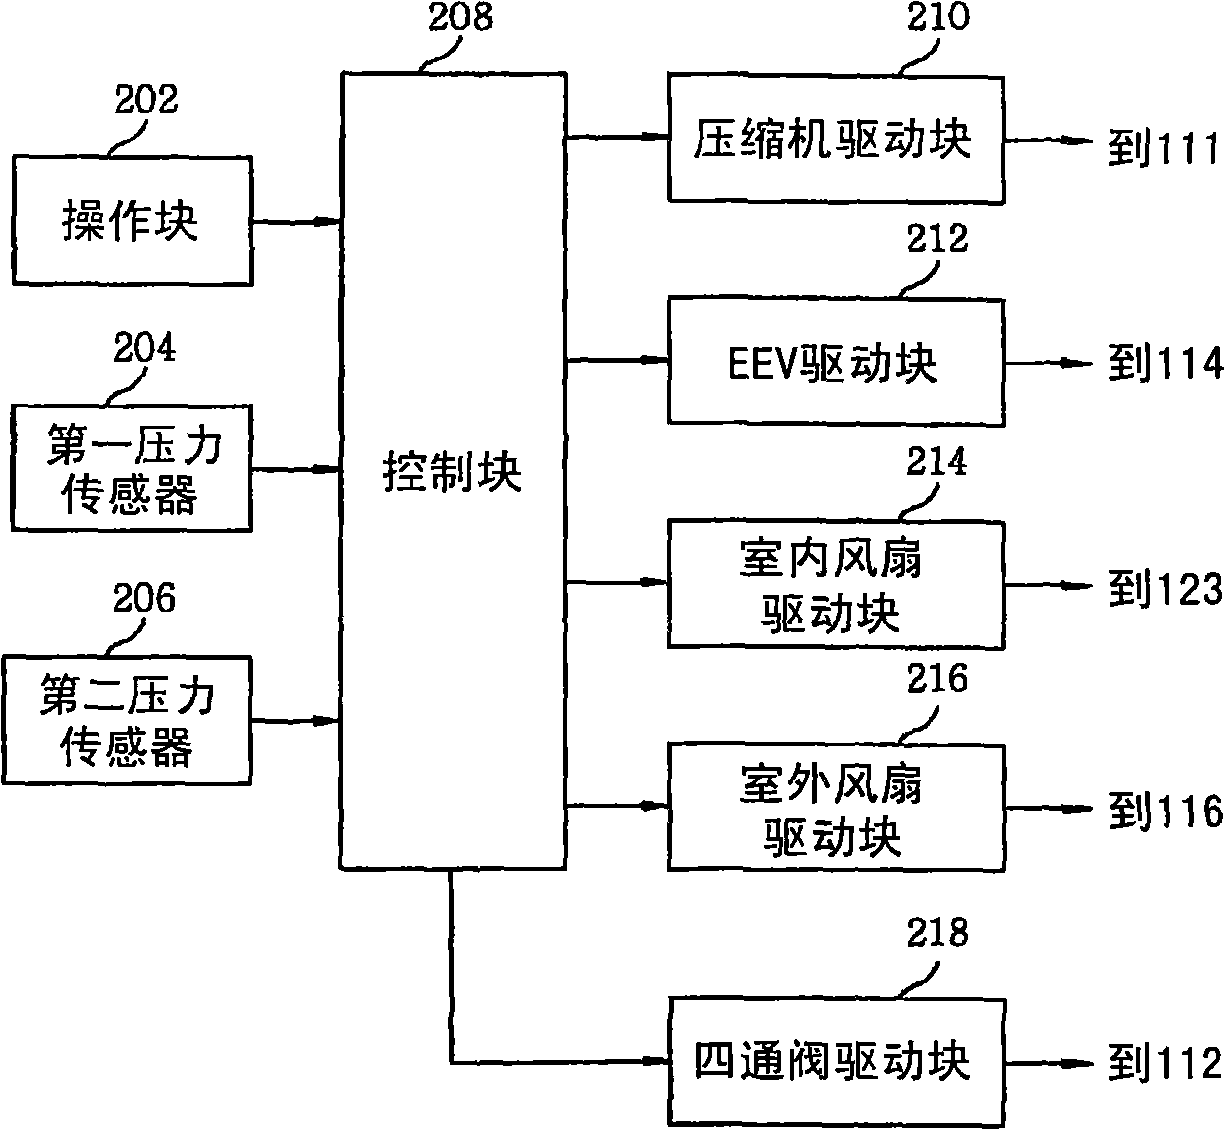 Apparatus and method for controlling stop operation of air conditioner